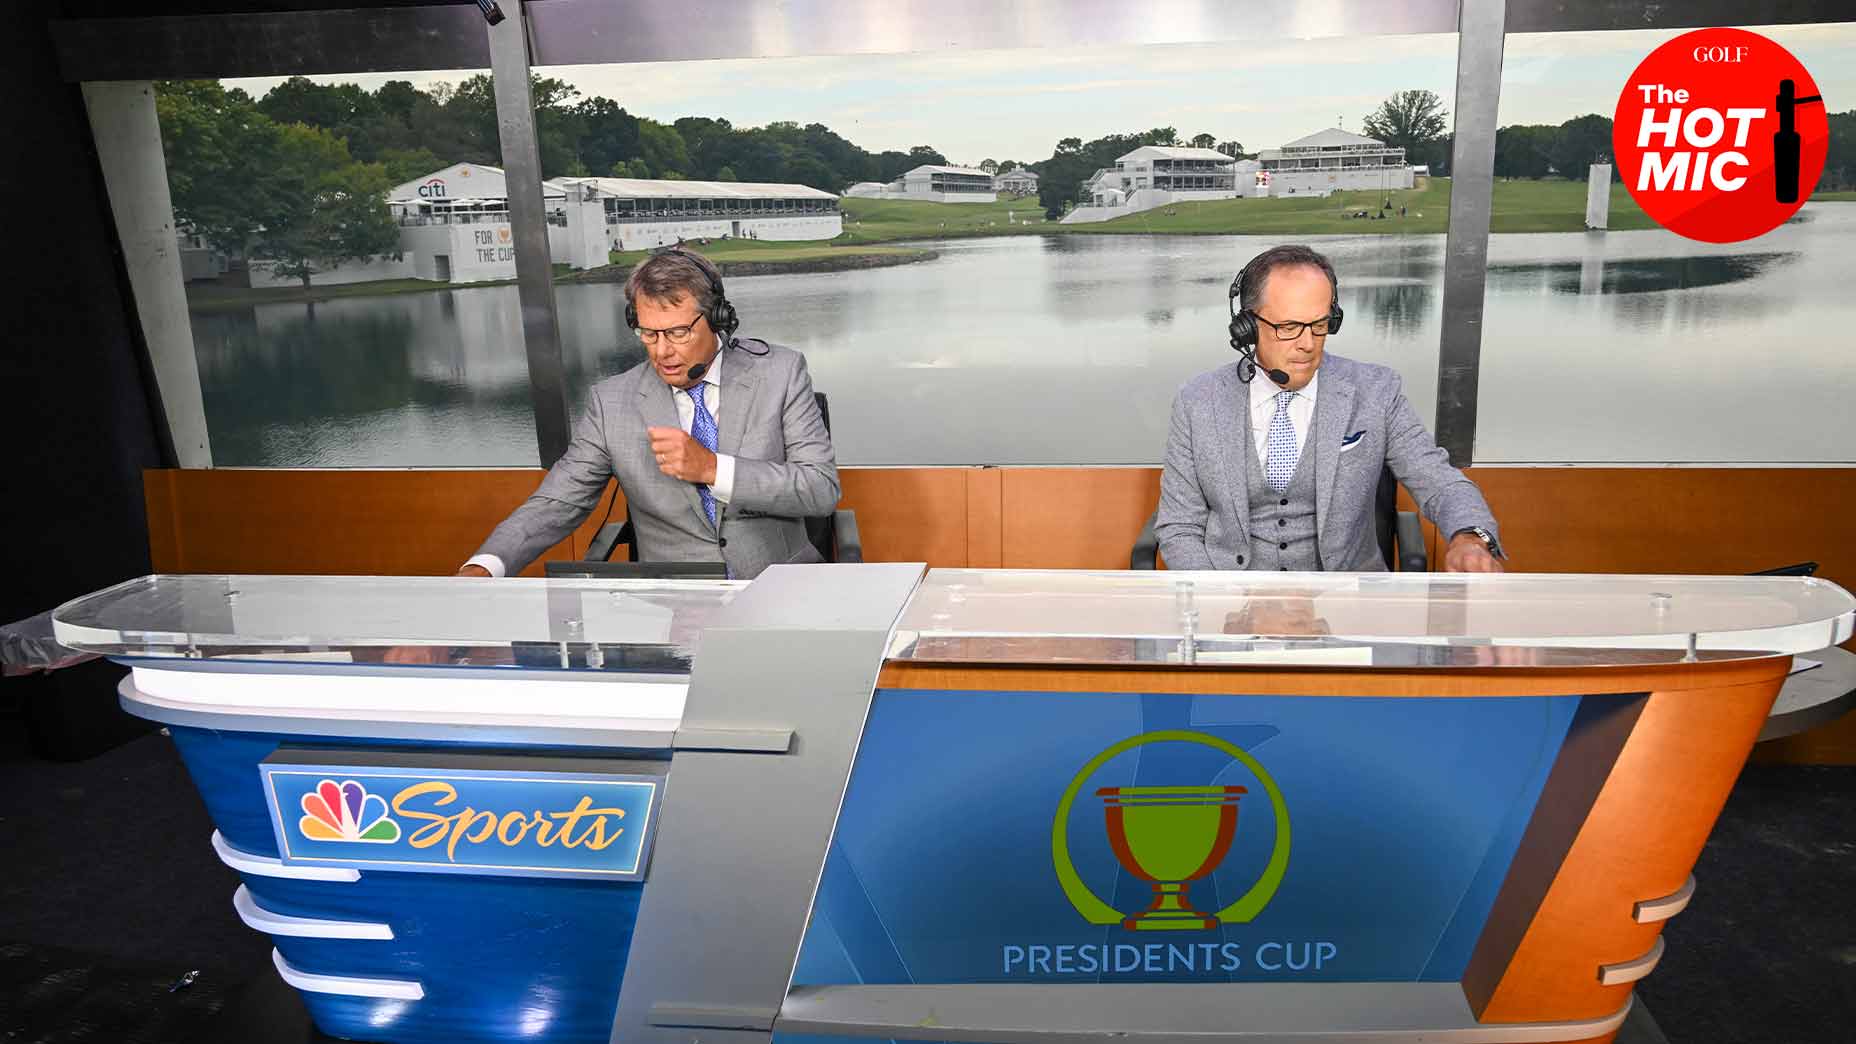 NBC Golf officially announces staffing changes for 2023